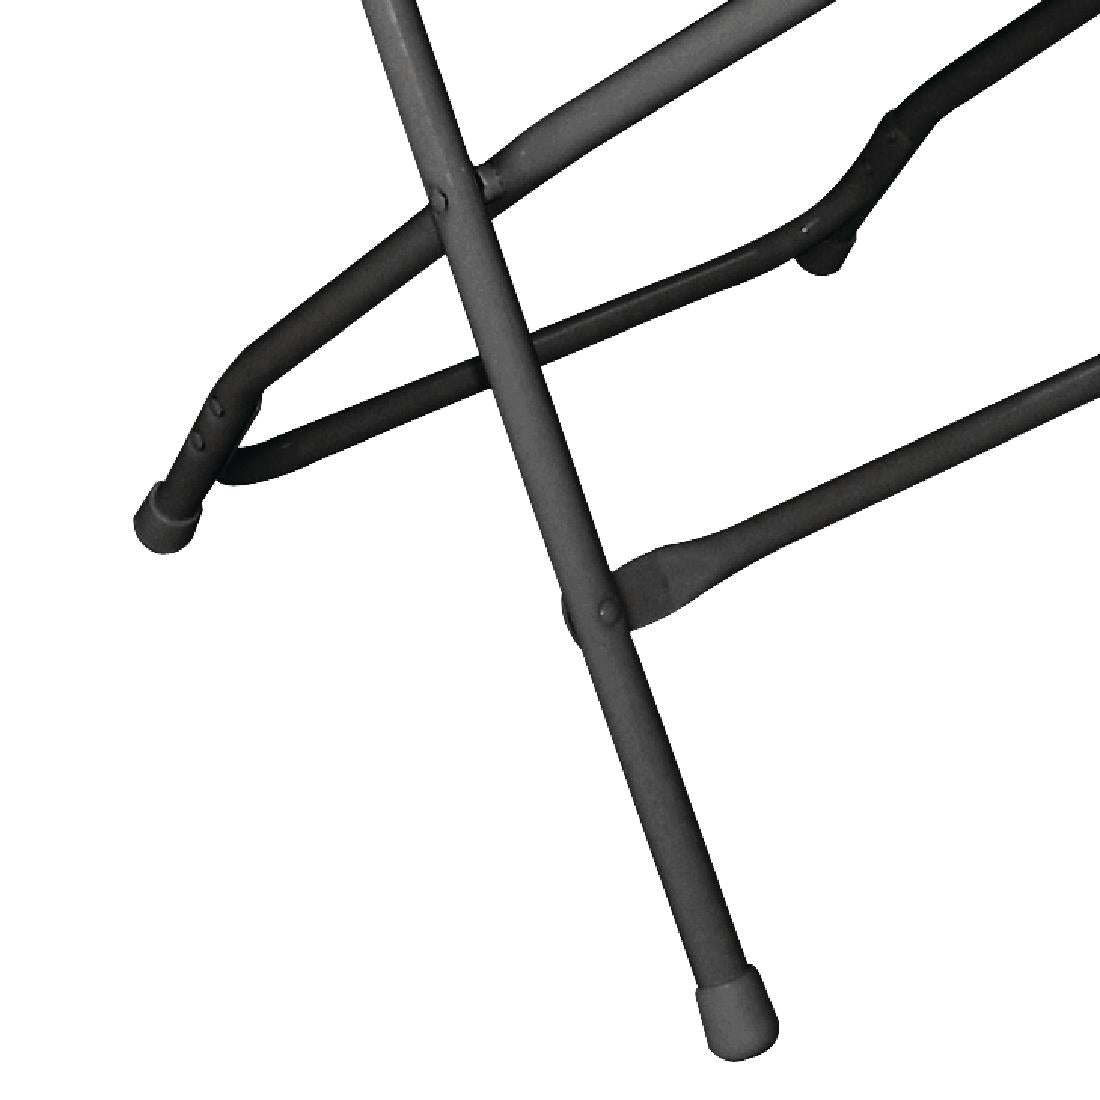 Bolero PP Folding Chairs (Pack of 10) JD Catering Equipment Solutions Ltd